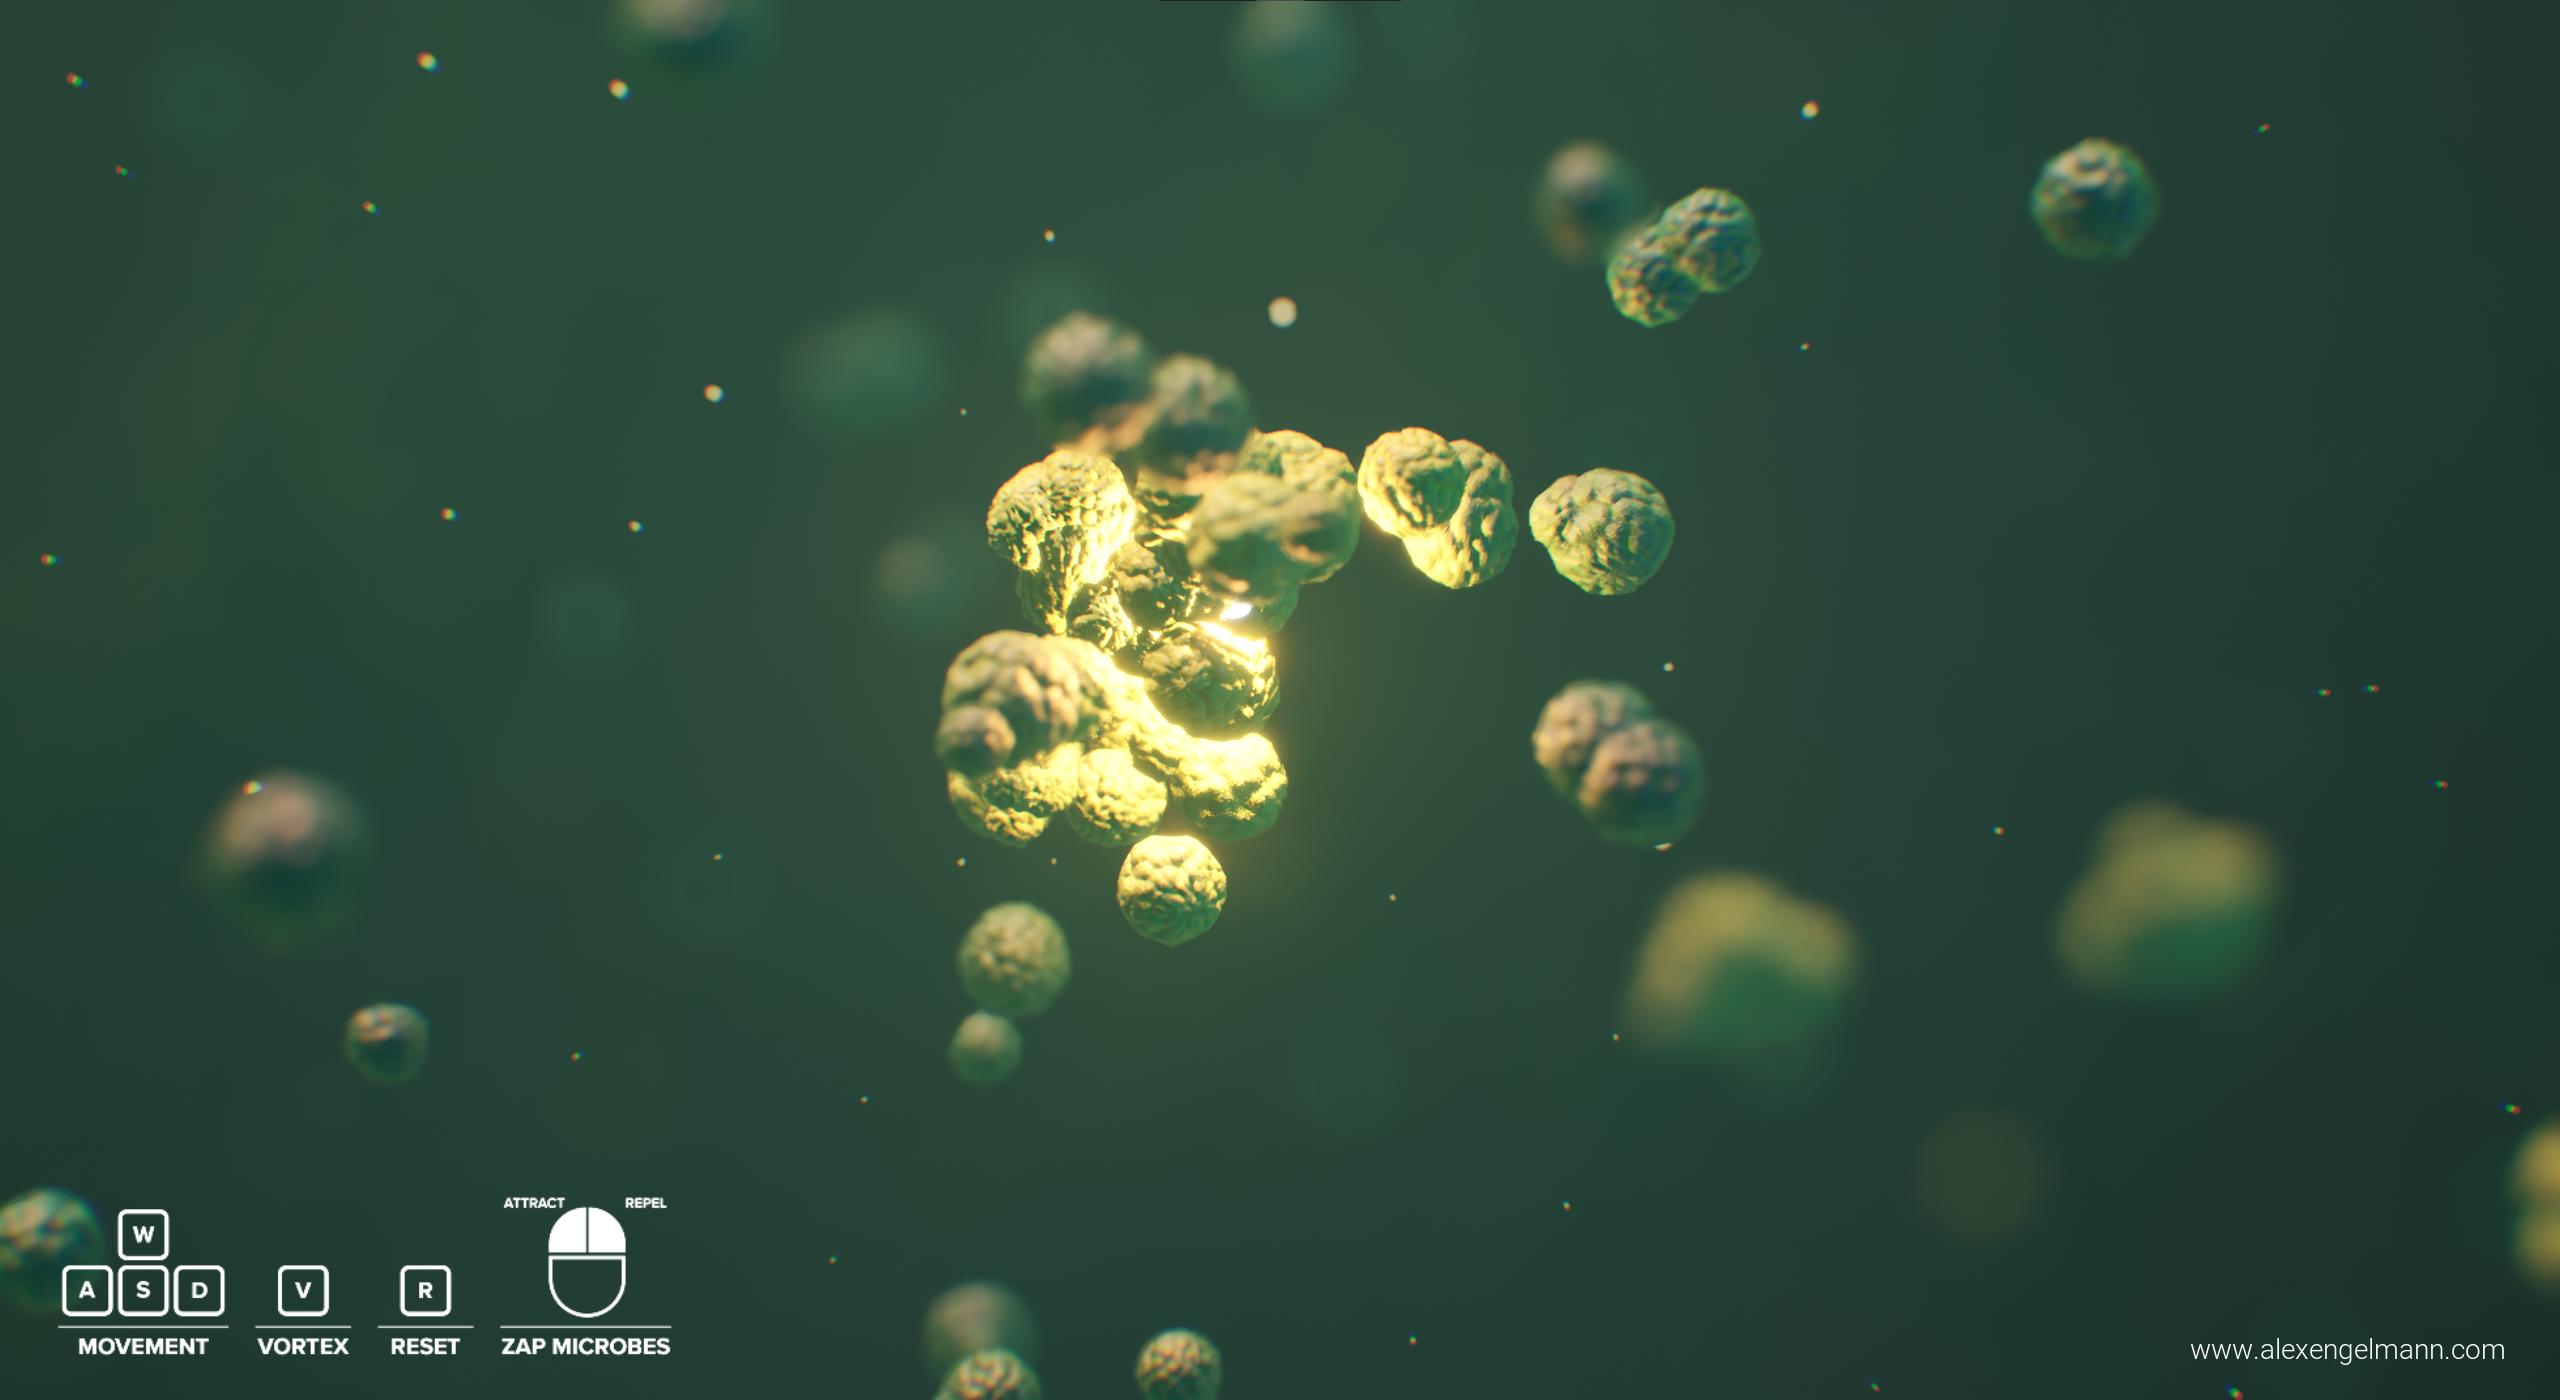 A render of virtual microbes